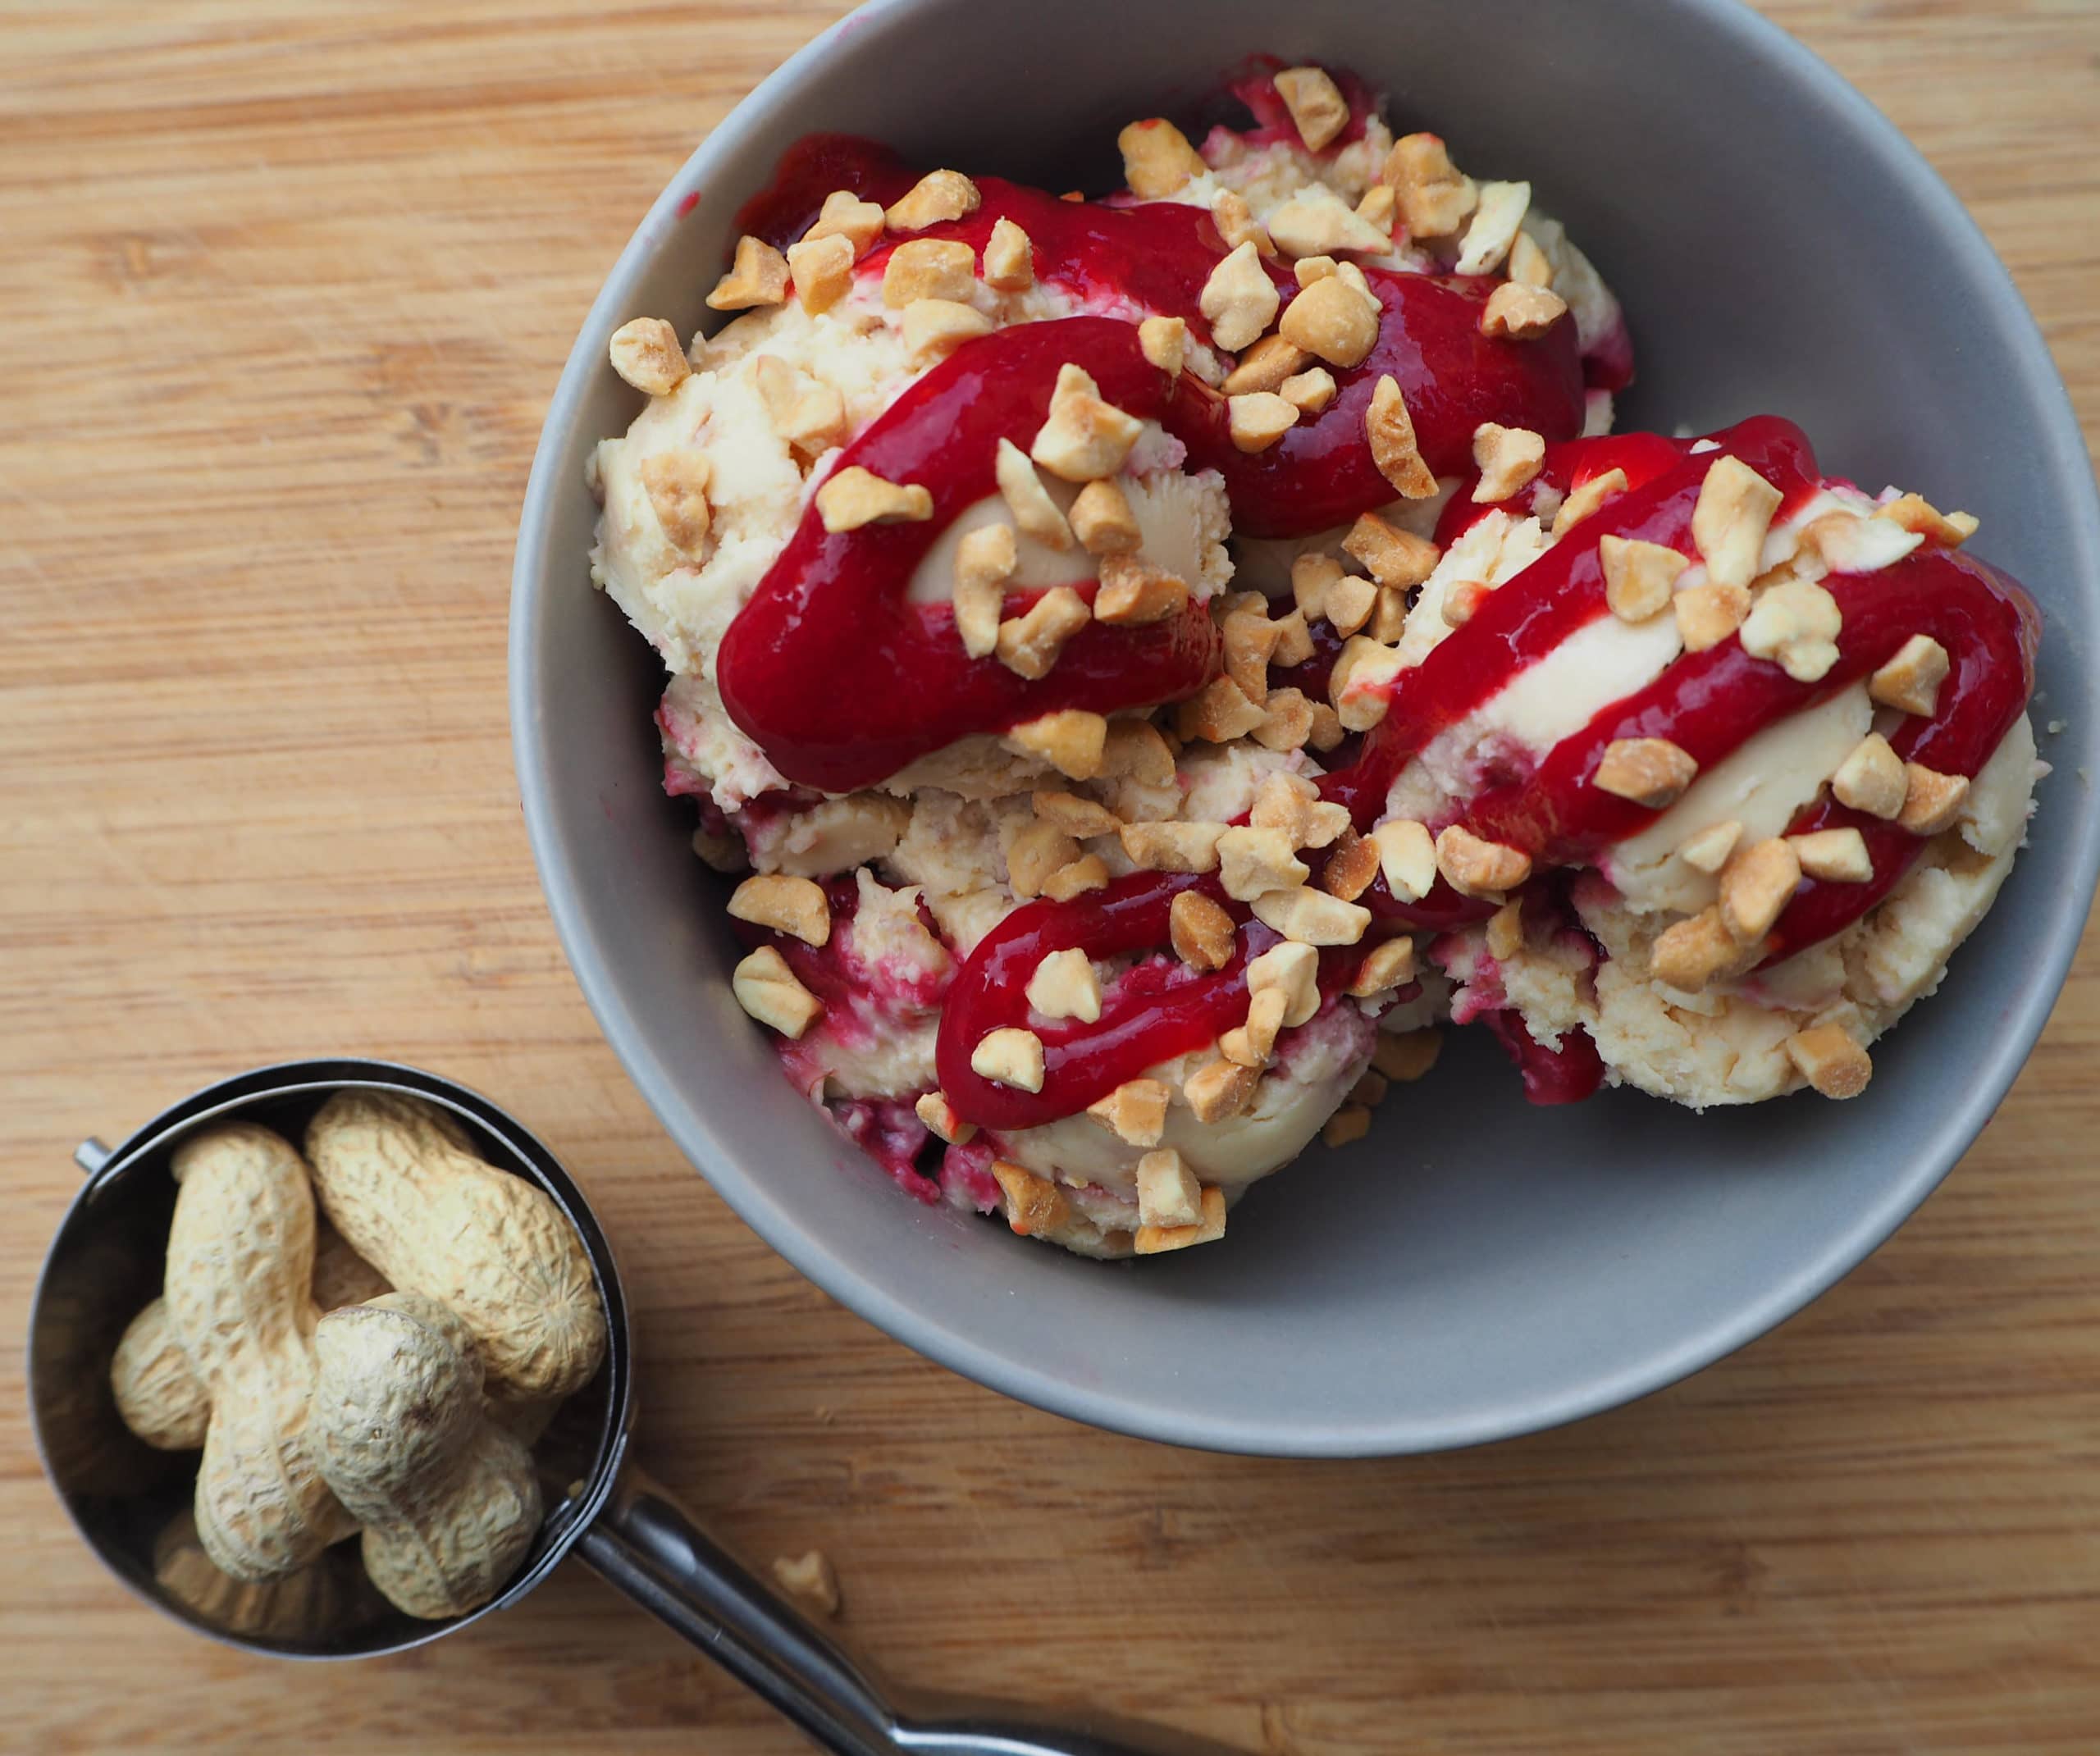 Peanut butter and jelly ice cream